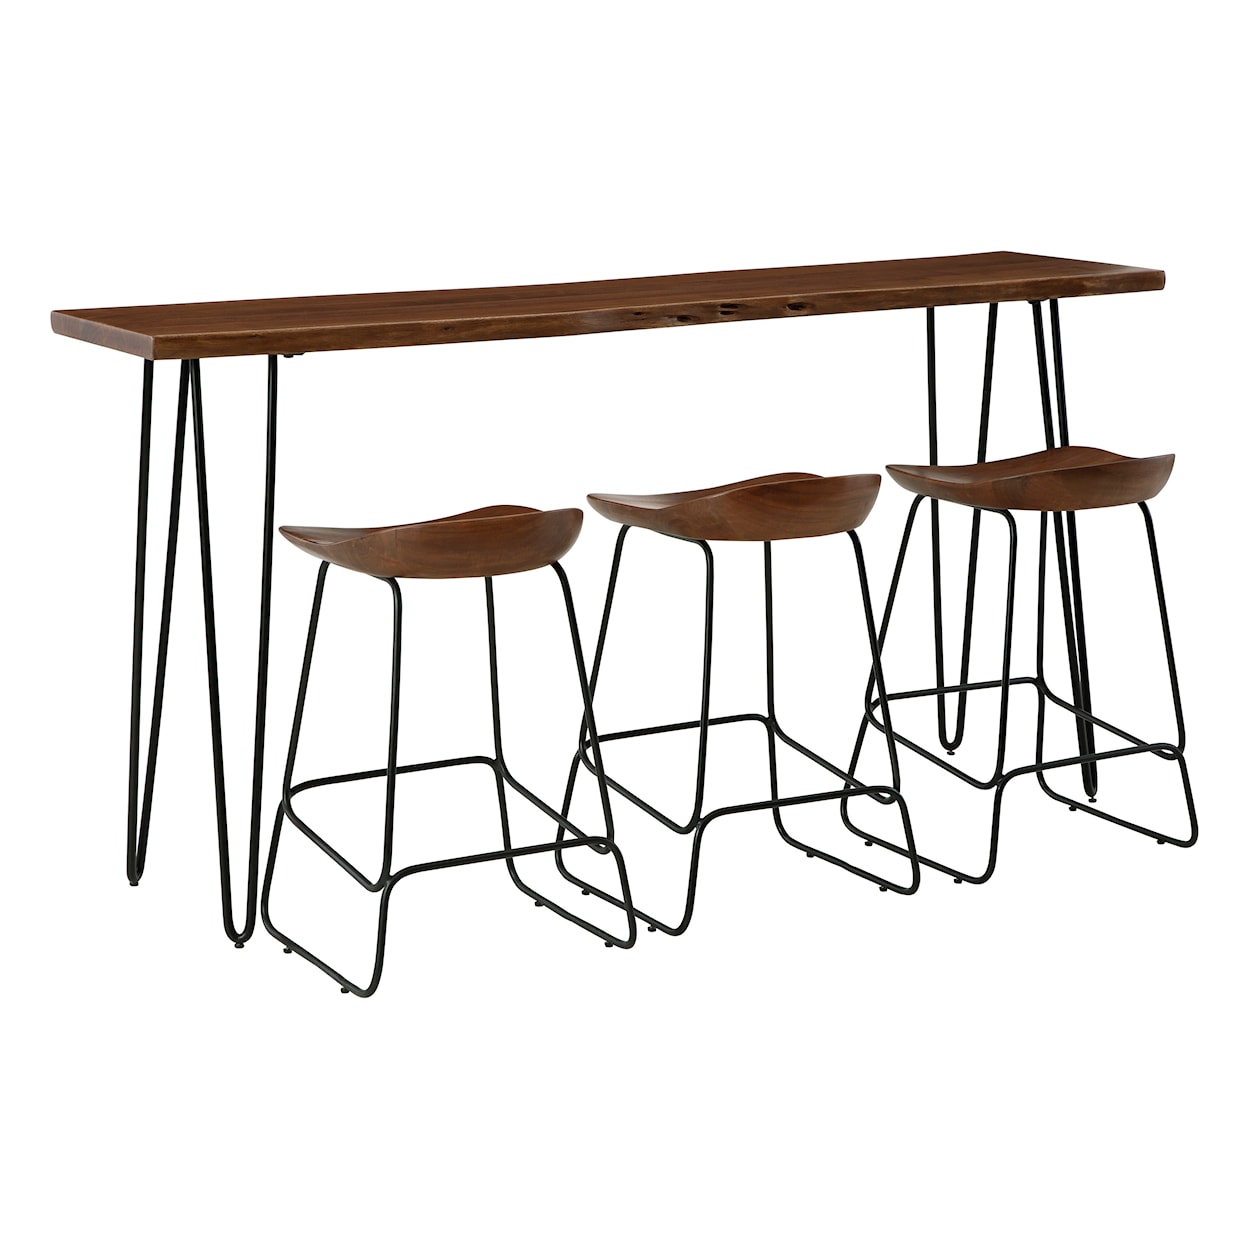 Signature Design by Ashley Wilinruck 4-Piece Counter Height Dining Set